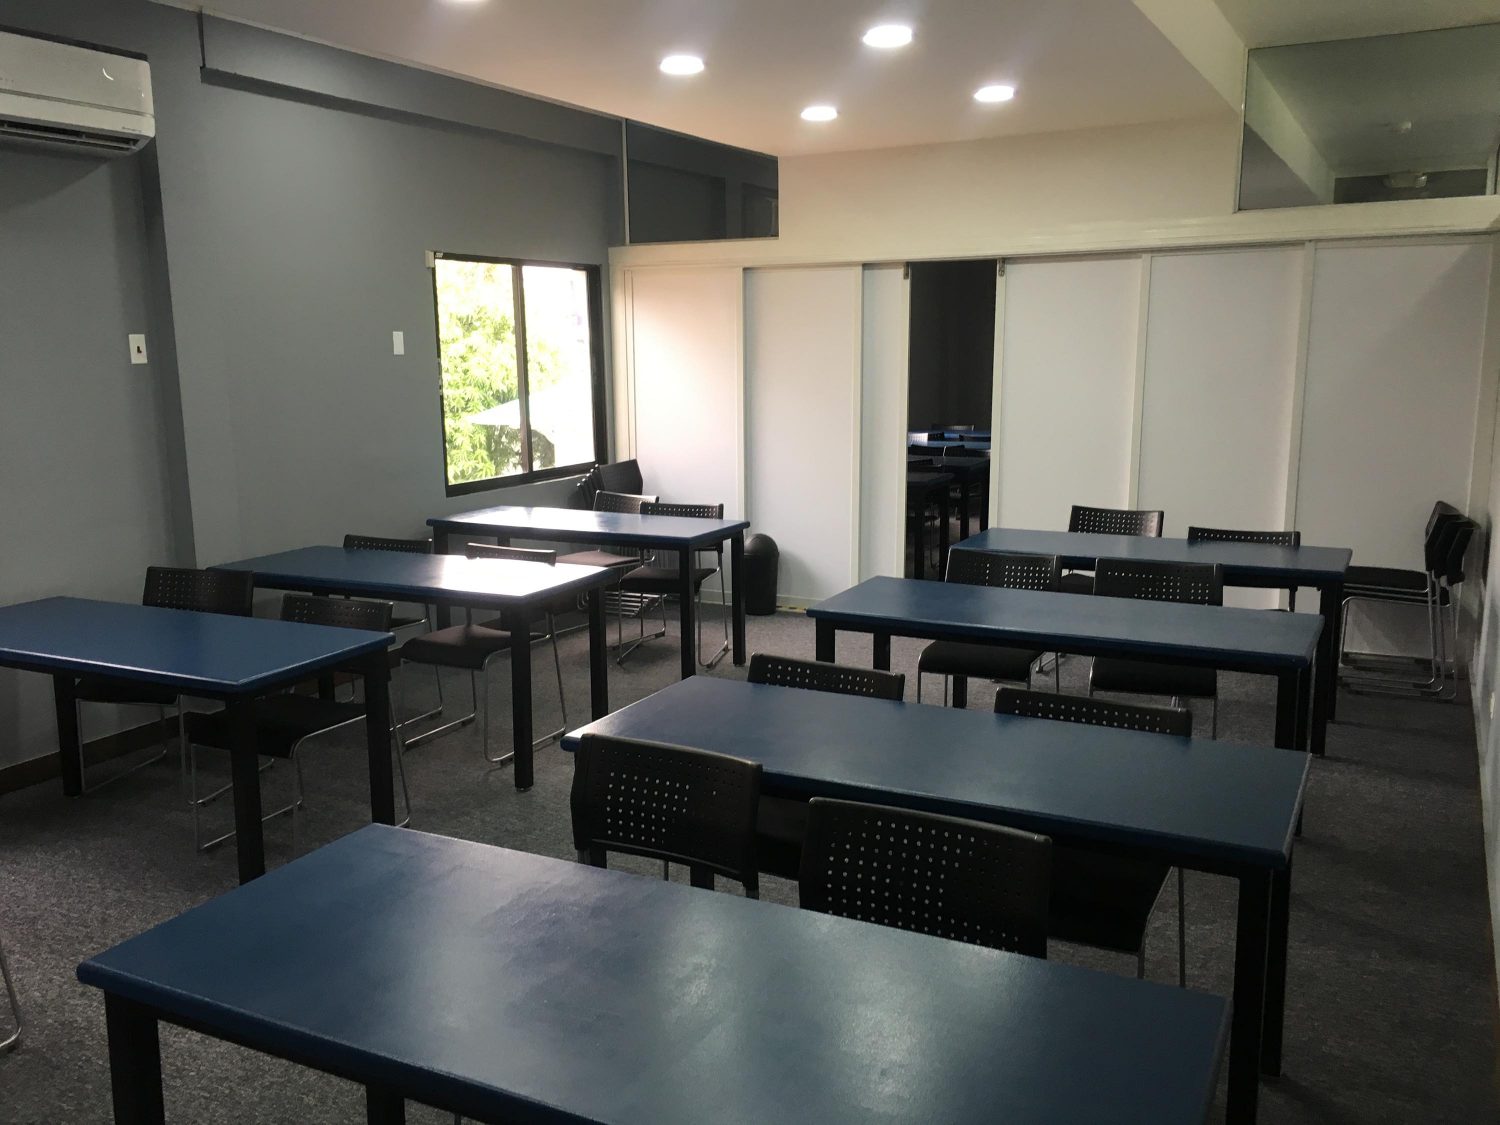 One of the classrooms at the Centre for Local Business Development